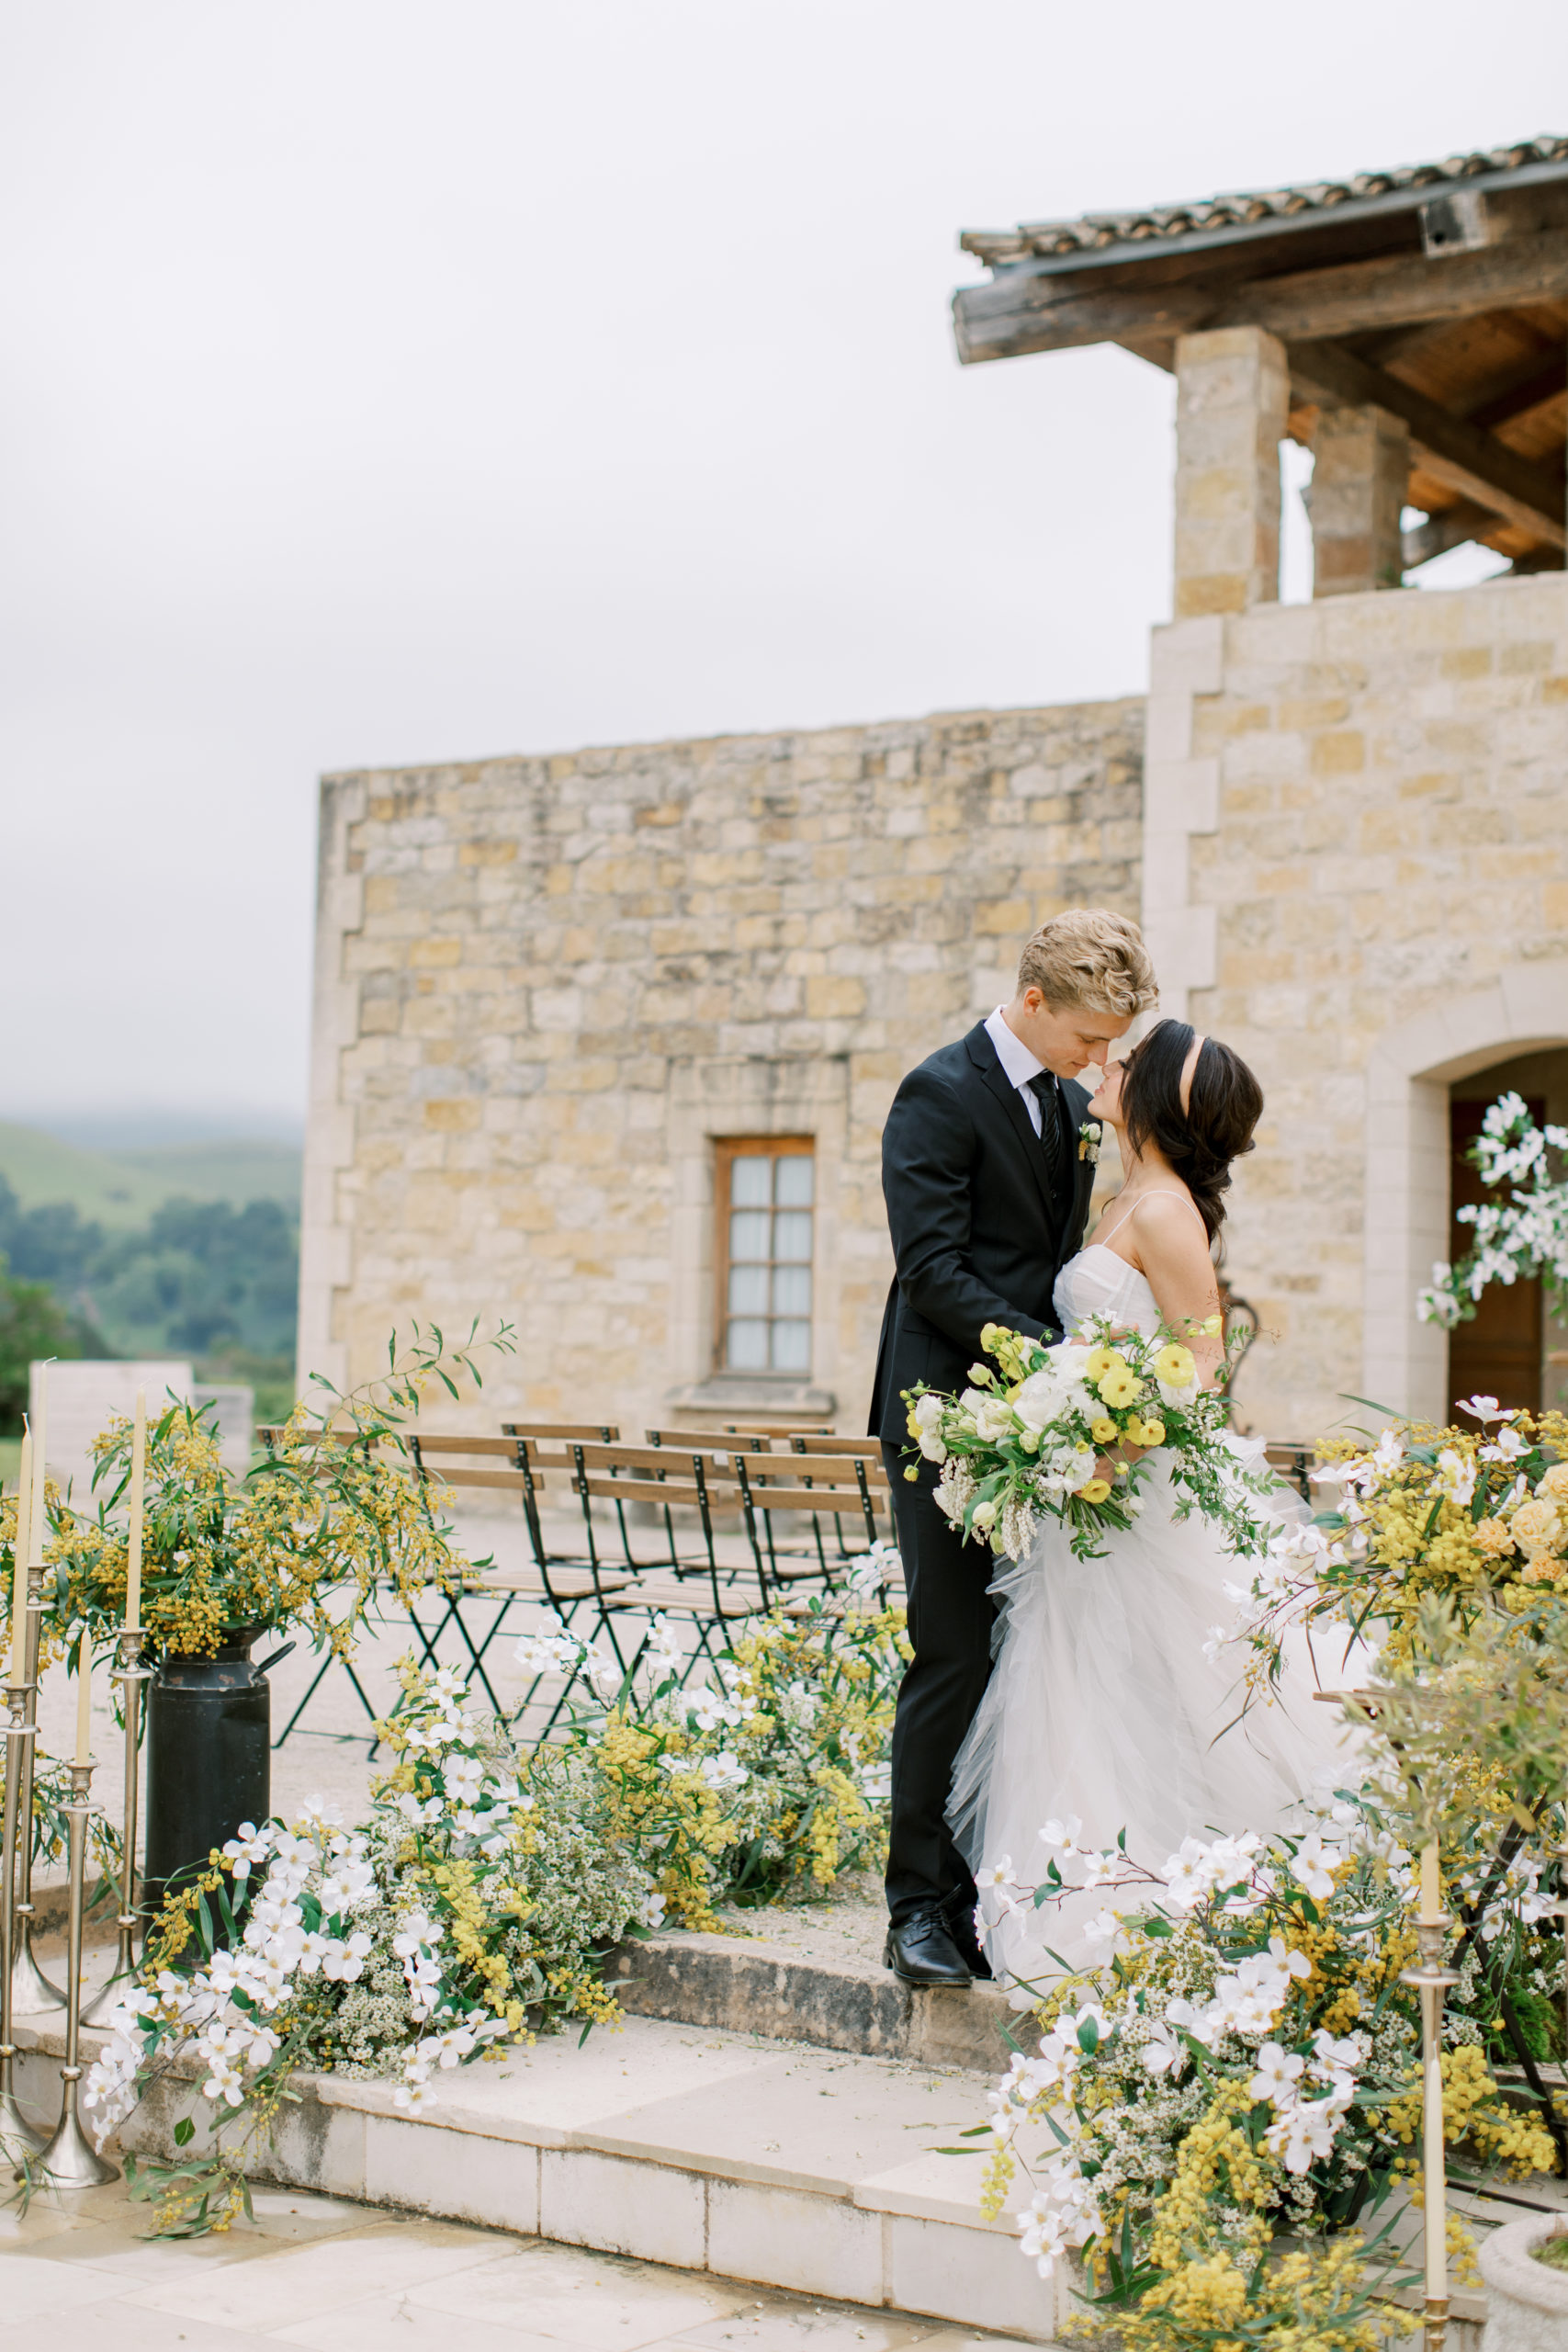 Bride and groom embrace surrounded by gold flowers at italian villa wedding Sunstone Winery Wedding Photography